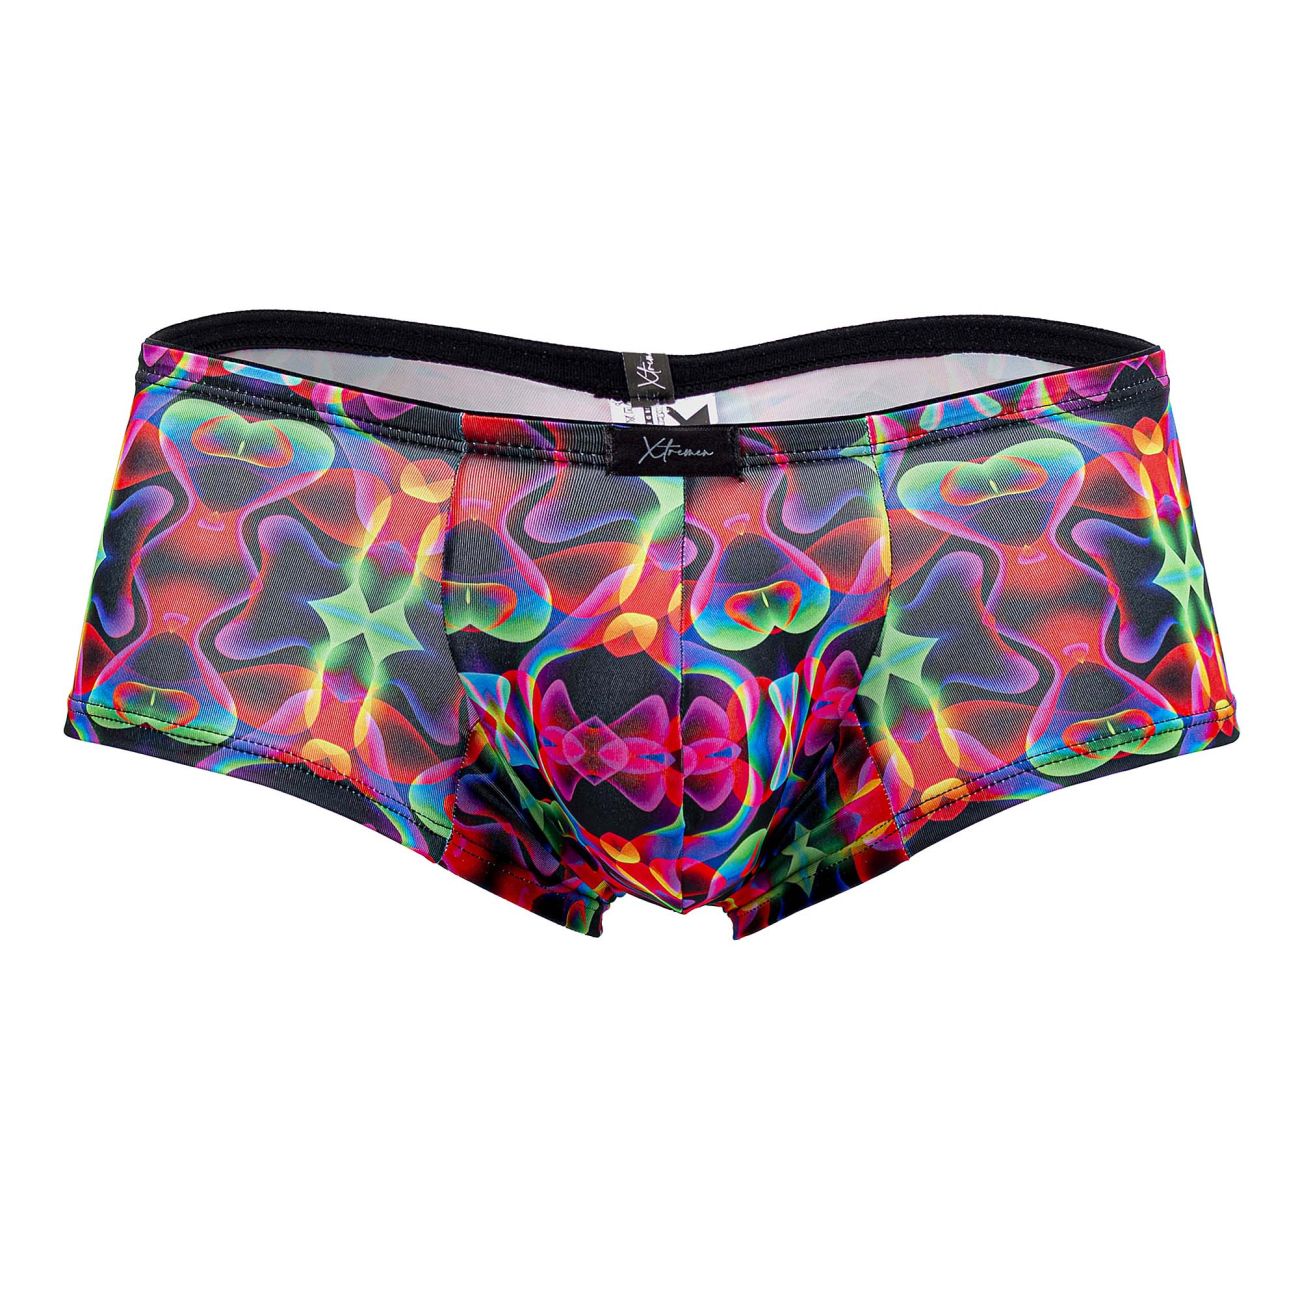 Xtremen 91170 Printed Trunks Bows